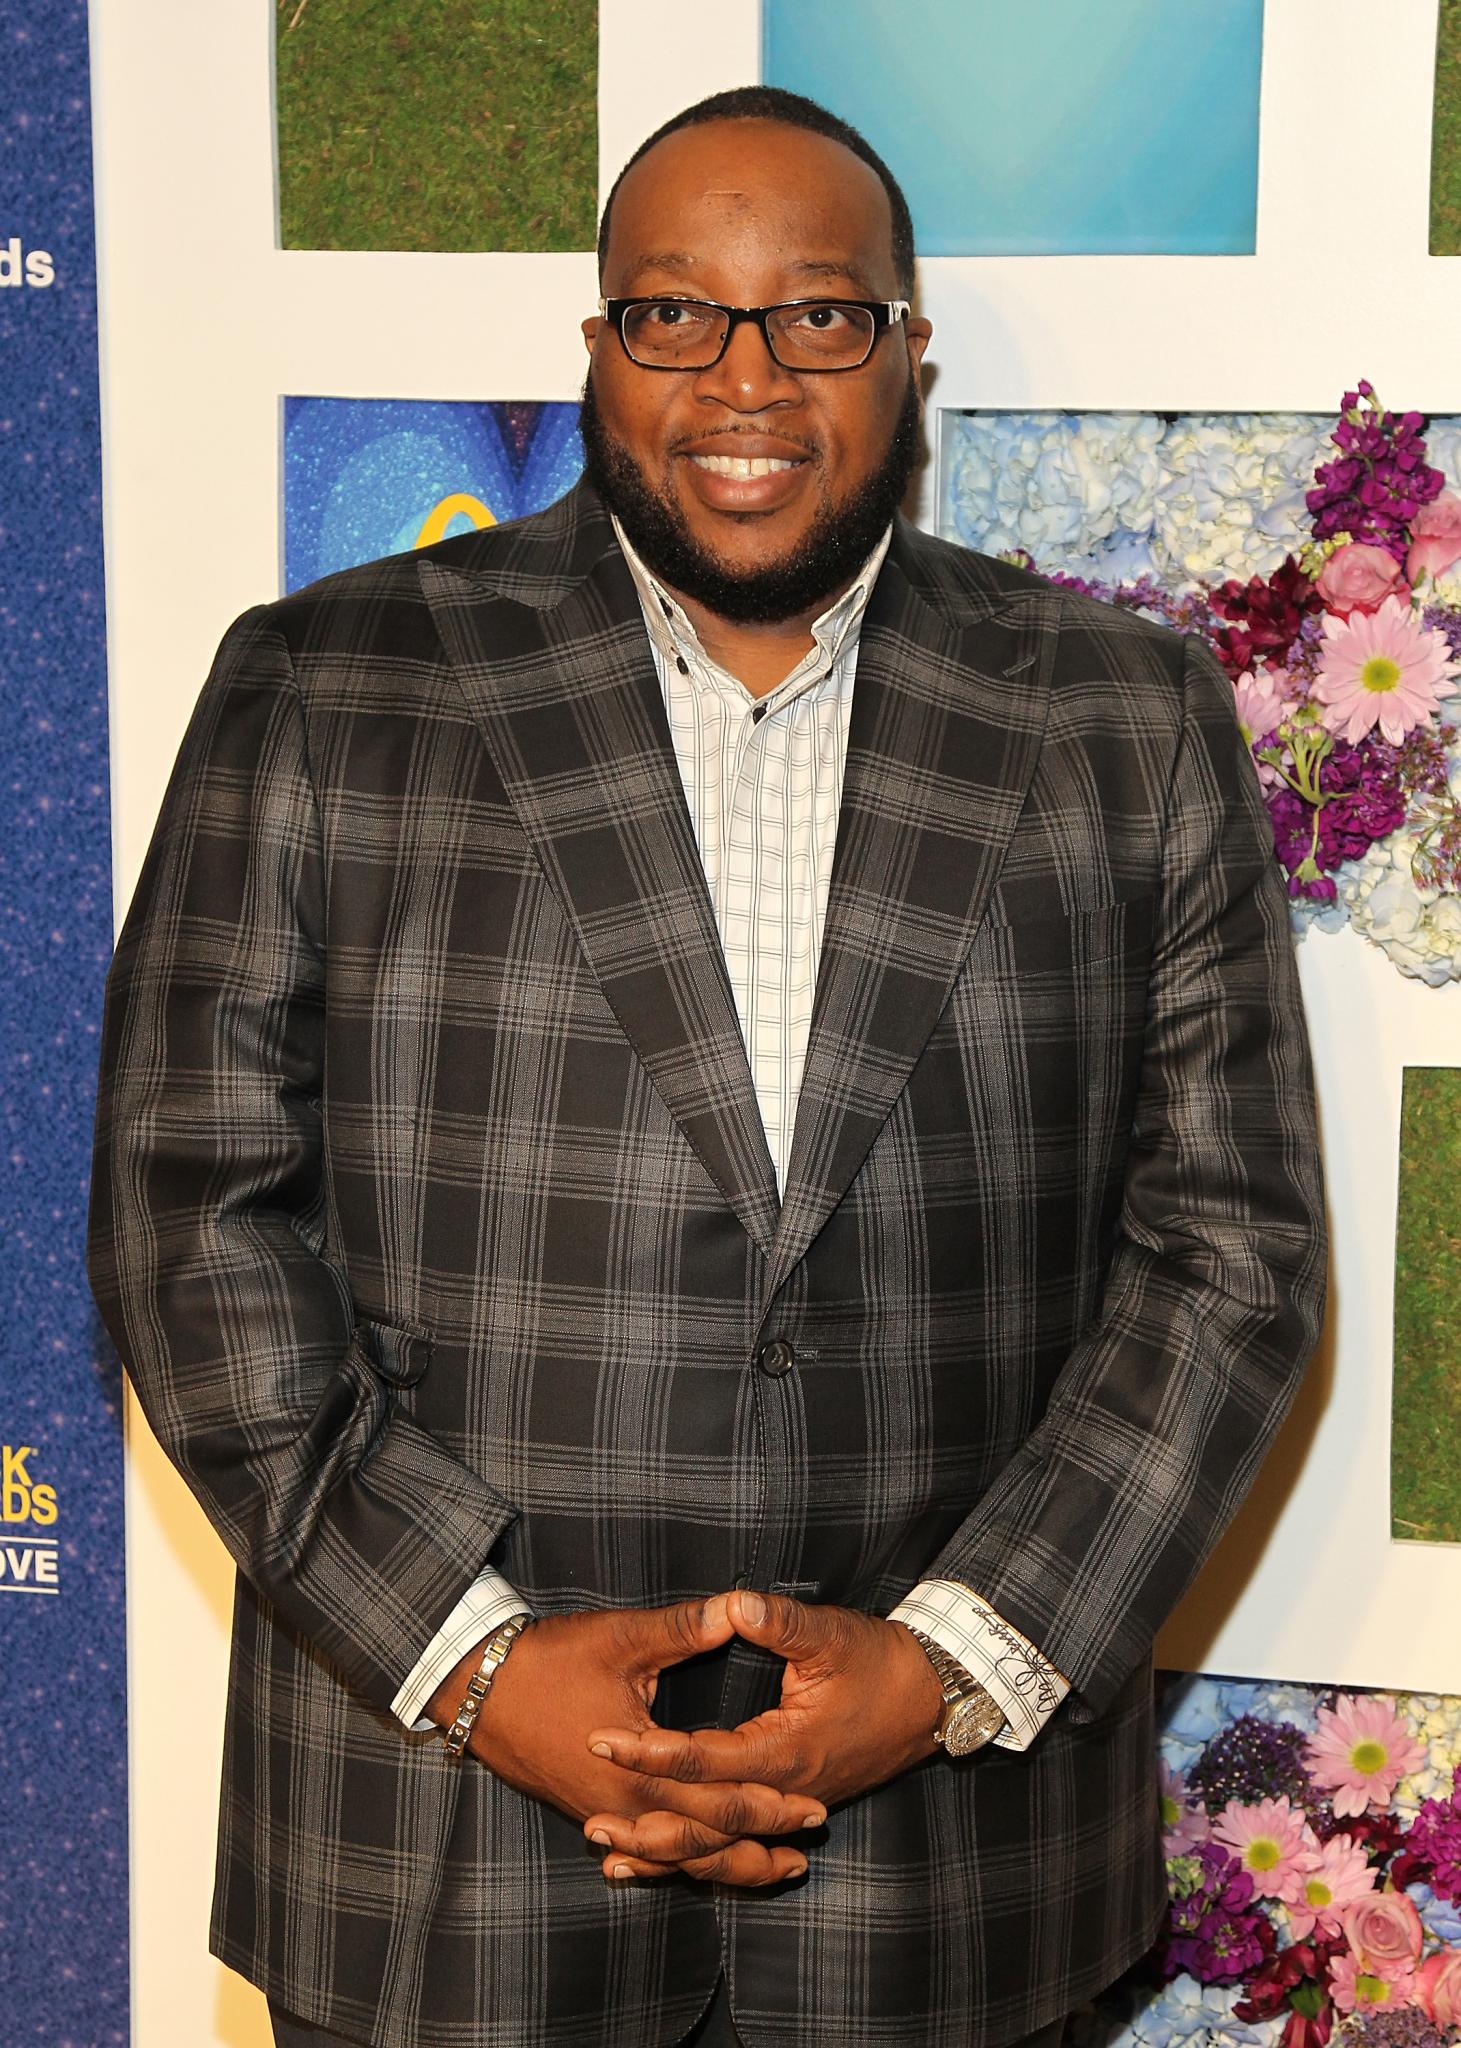 ESSENCE Sits Down with Marvin Sapp to Discuss His 10 Solo Projects, Dating Life and More